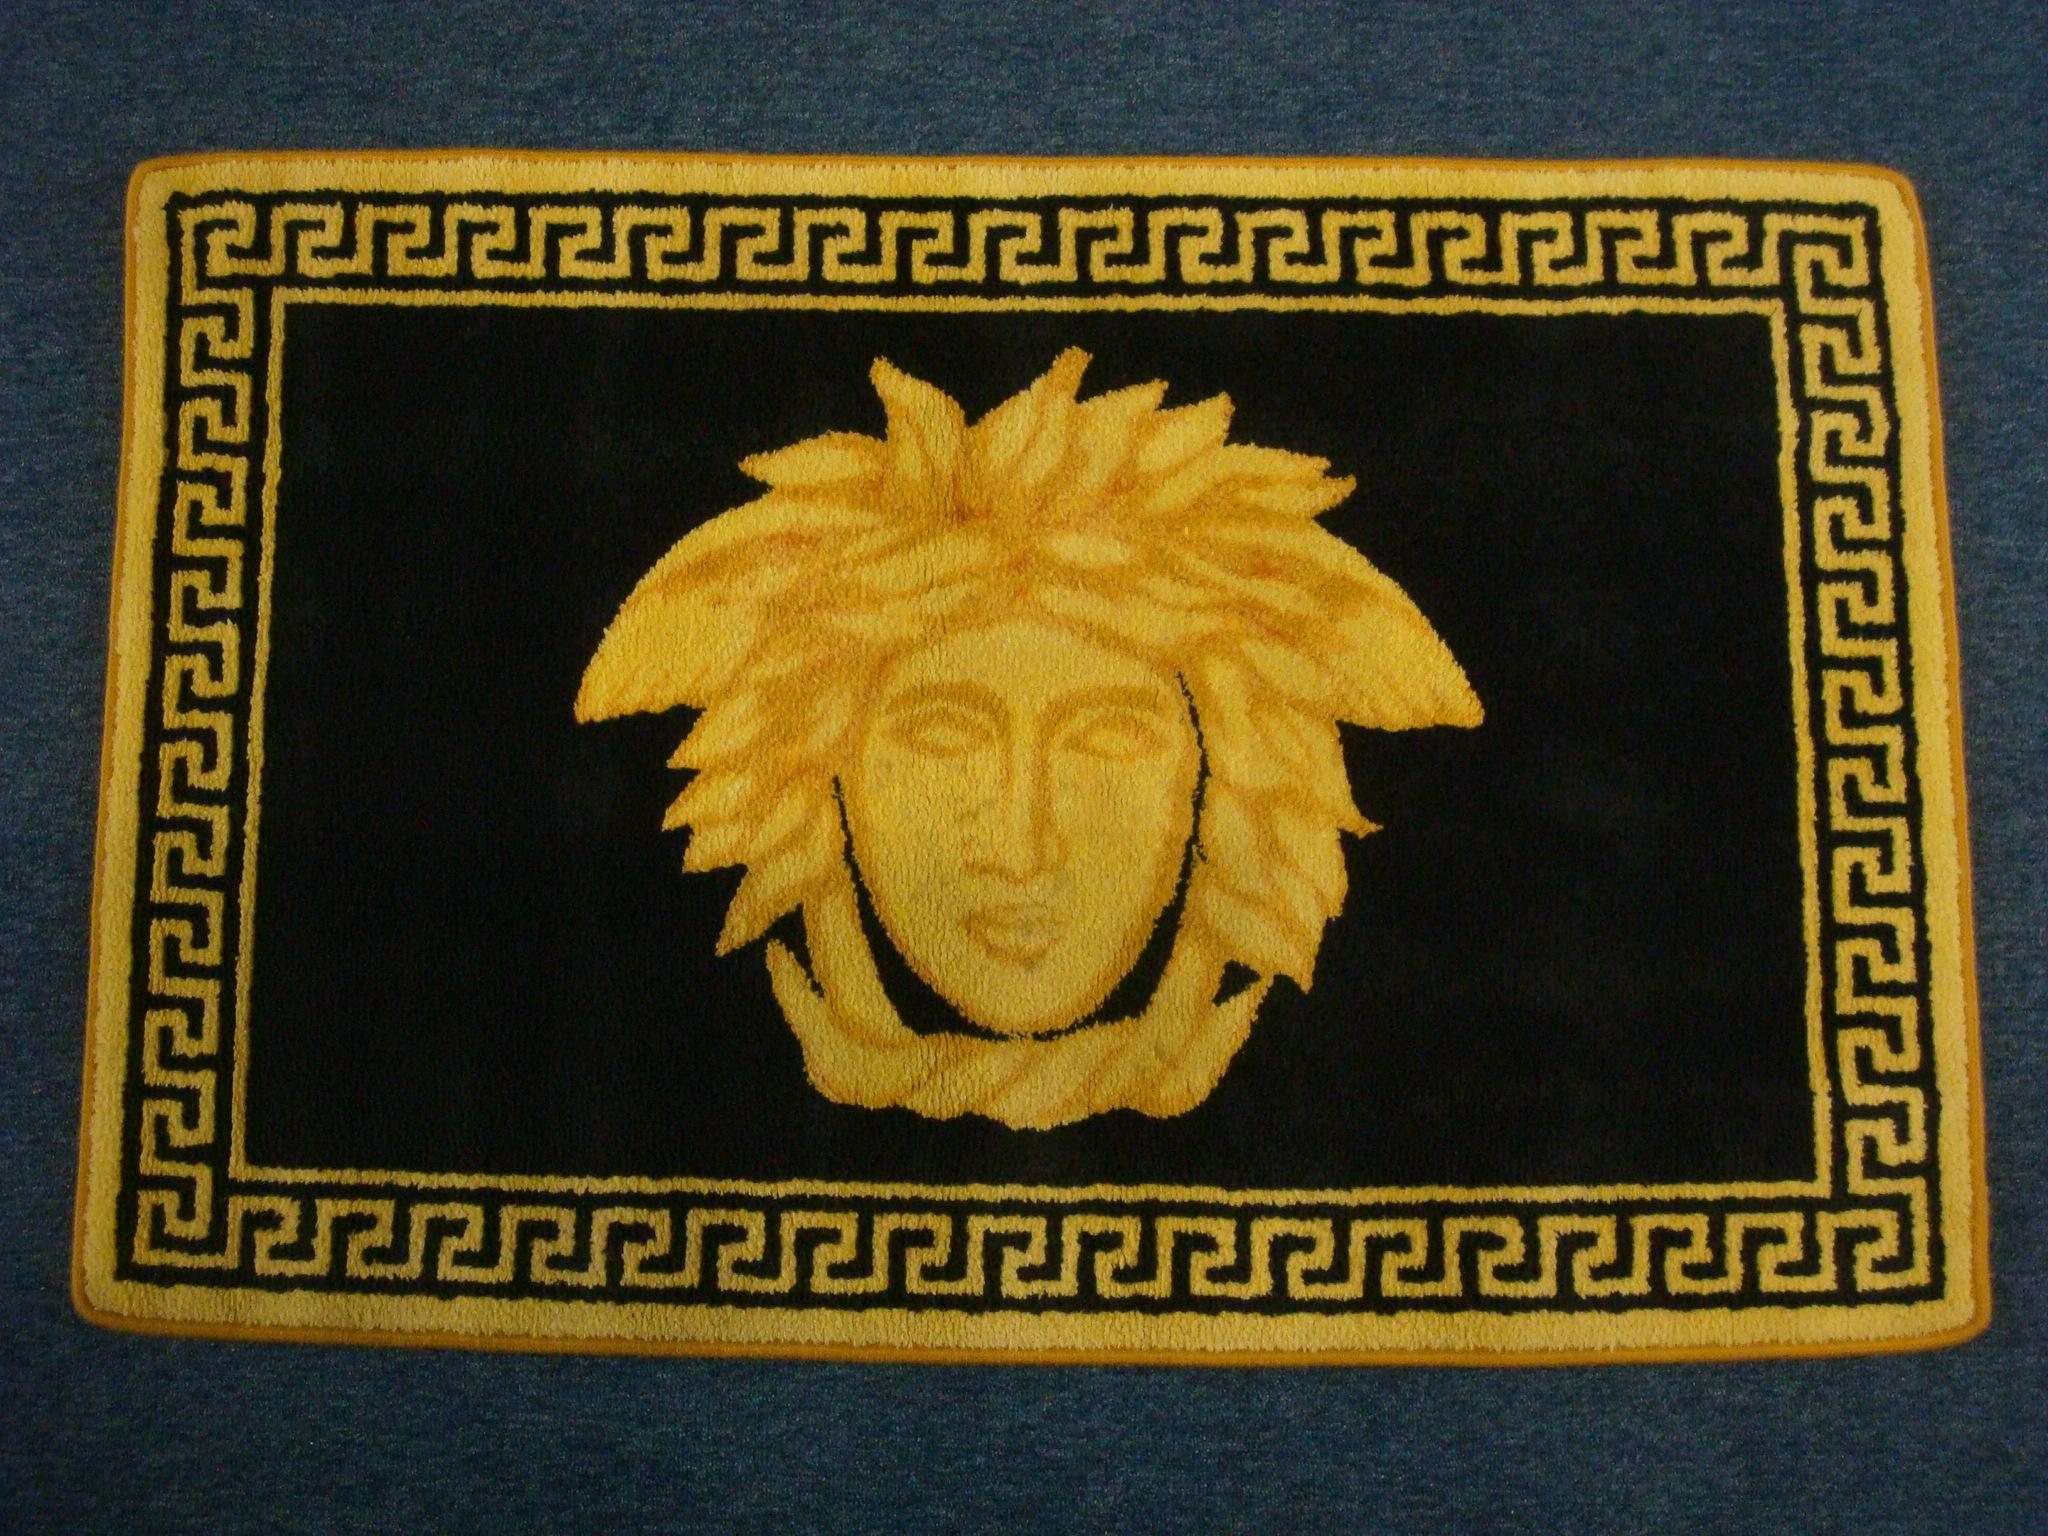 Black Gold Rug by Gianni Versace for Versace.  Medusa Original. Italy 1980´s.
It has the creativity and love of Gianni Versace's Classic style.
The style of the design is reminiscent of the designer.
This is a vintage Gianni Versace wool rug.